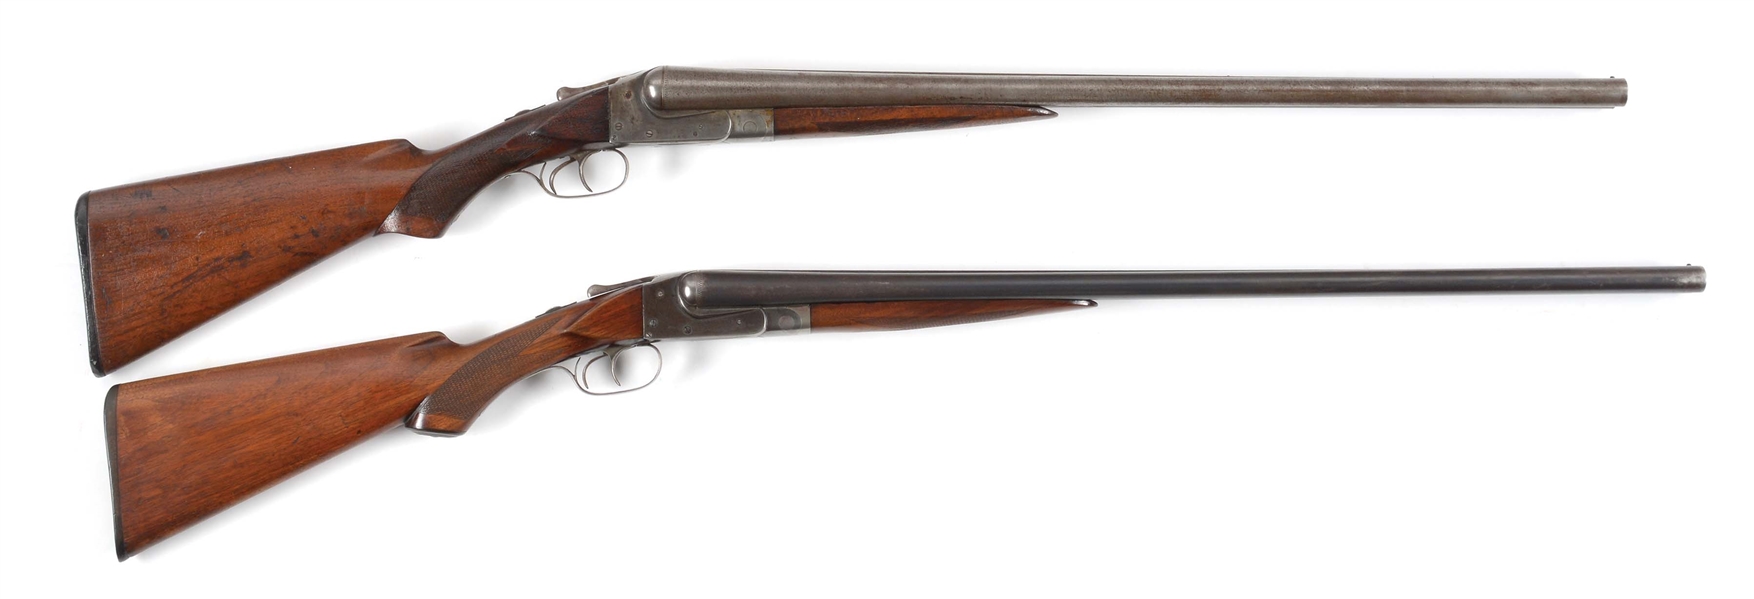 (C) LOT OF TWO: TWO ITHACA CRASS SIDE BY SIDE SHOTGUNS.